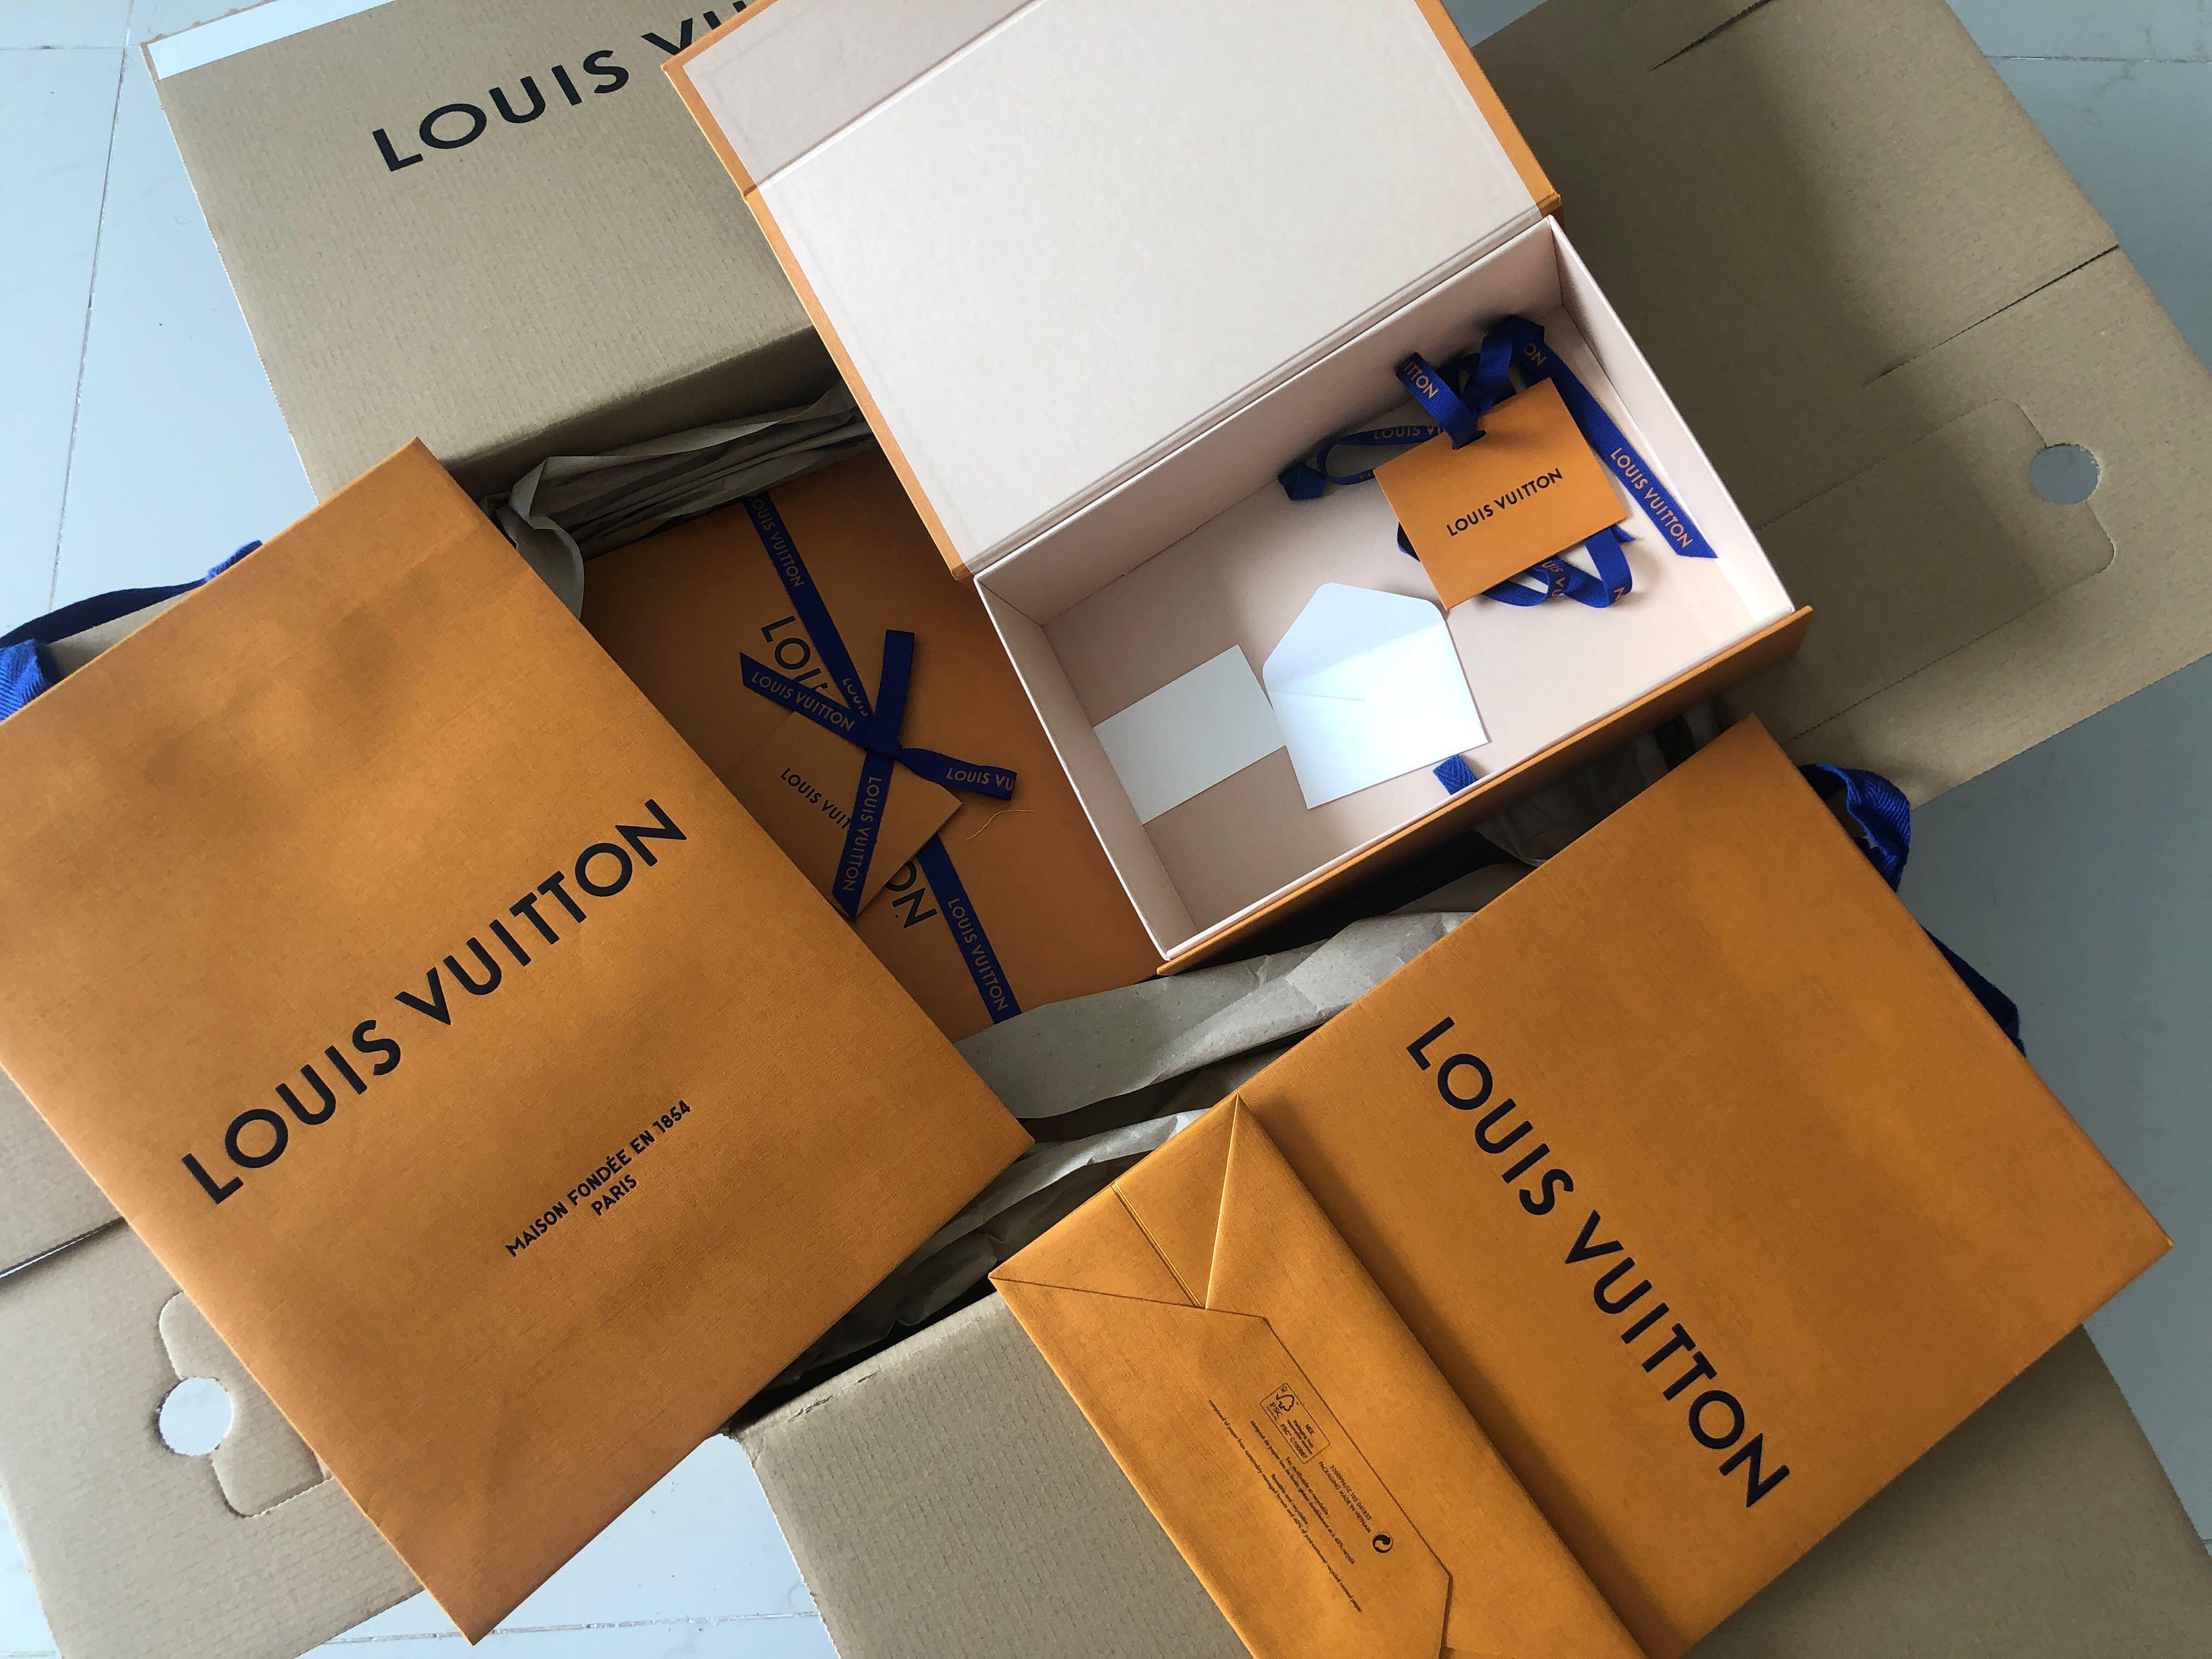 Louis Vuitton Email Newsletters